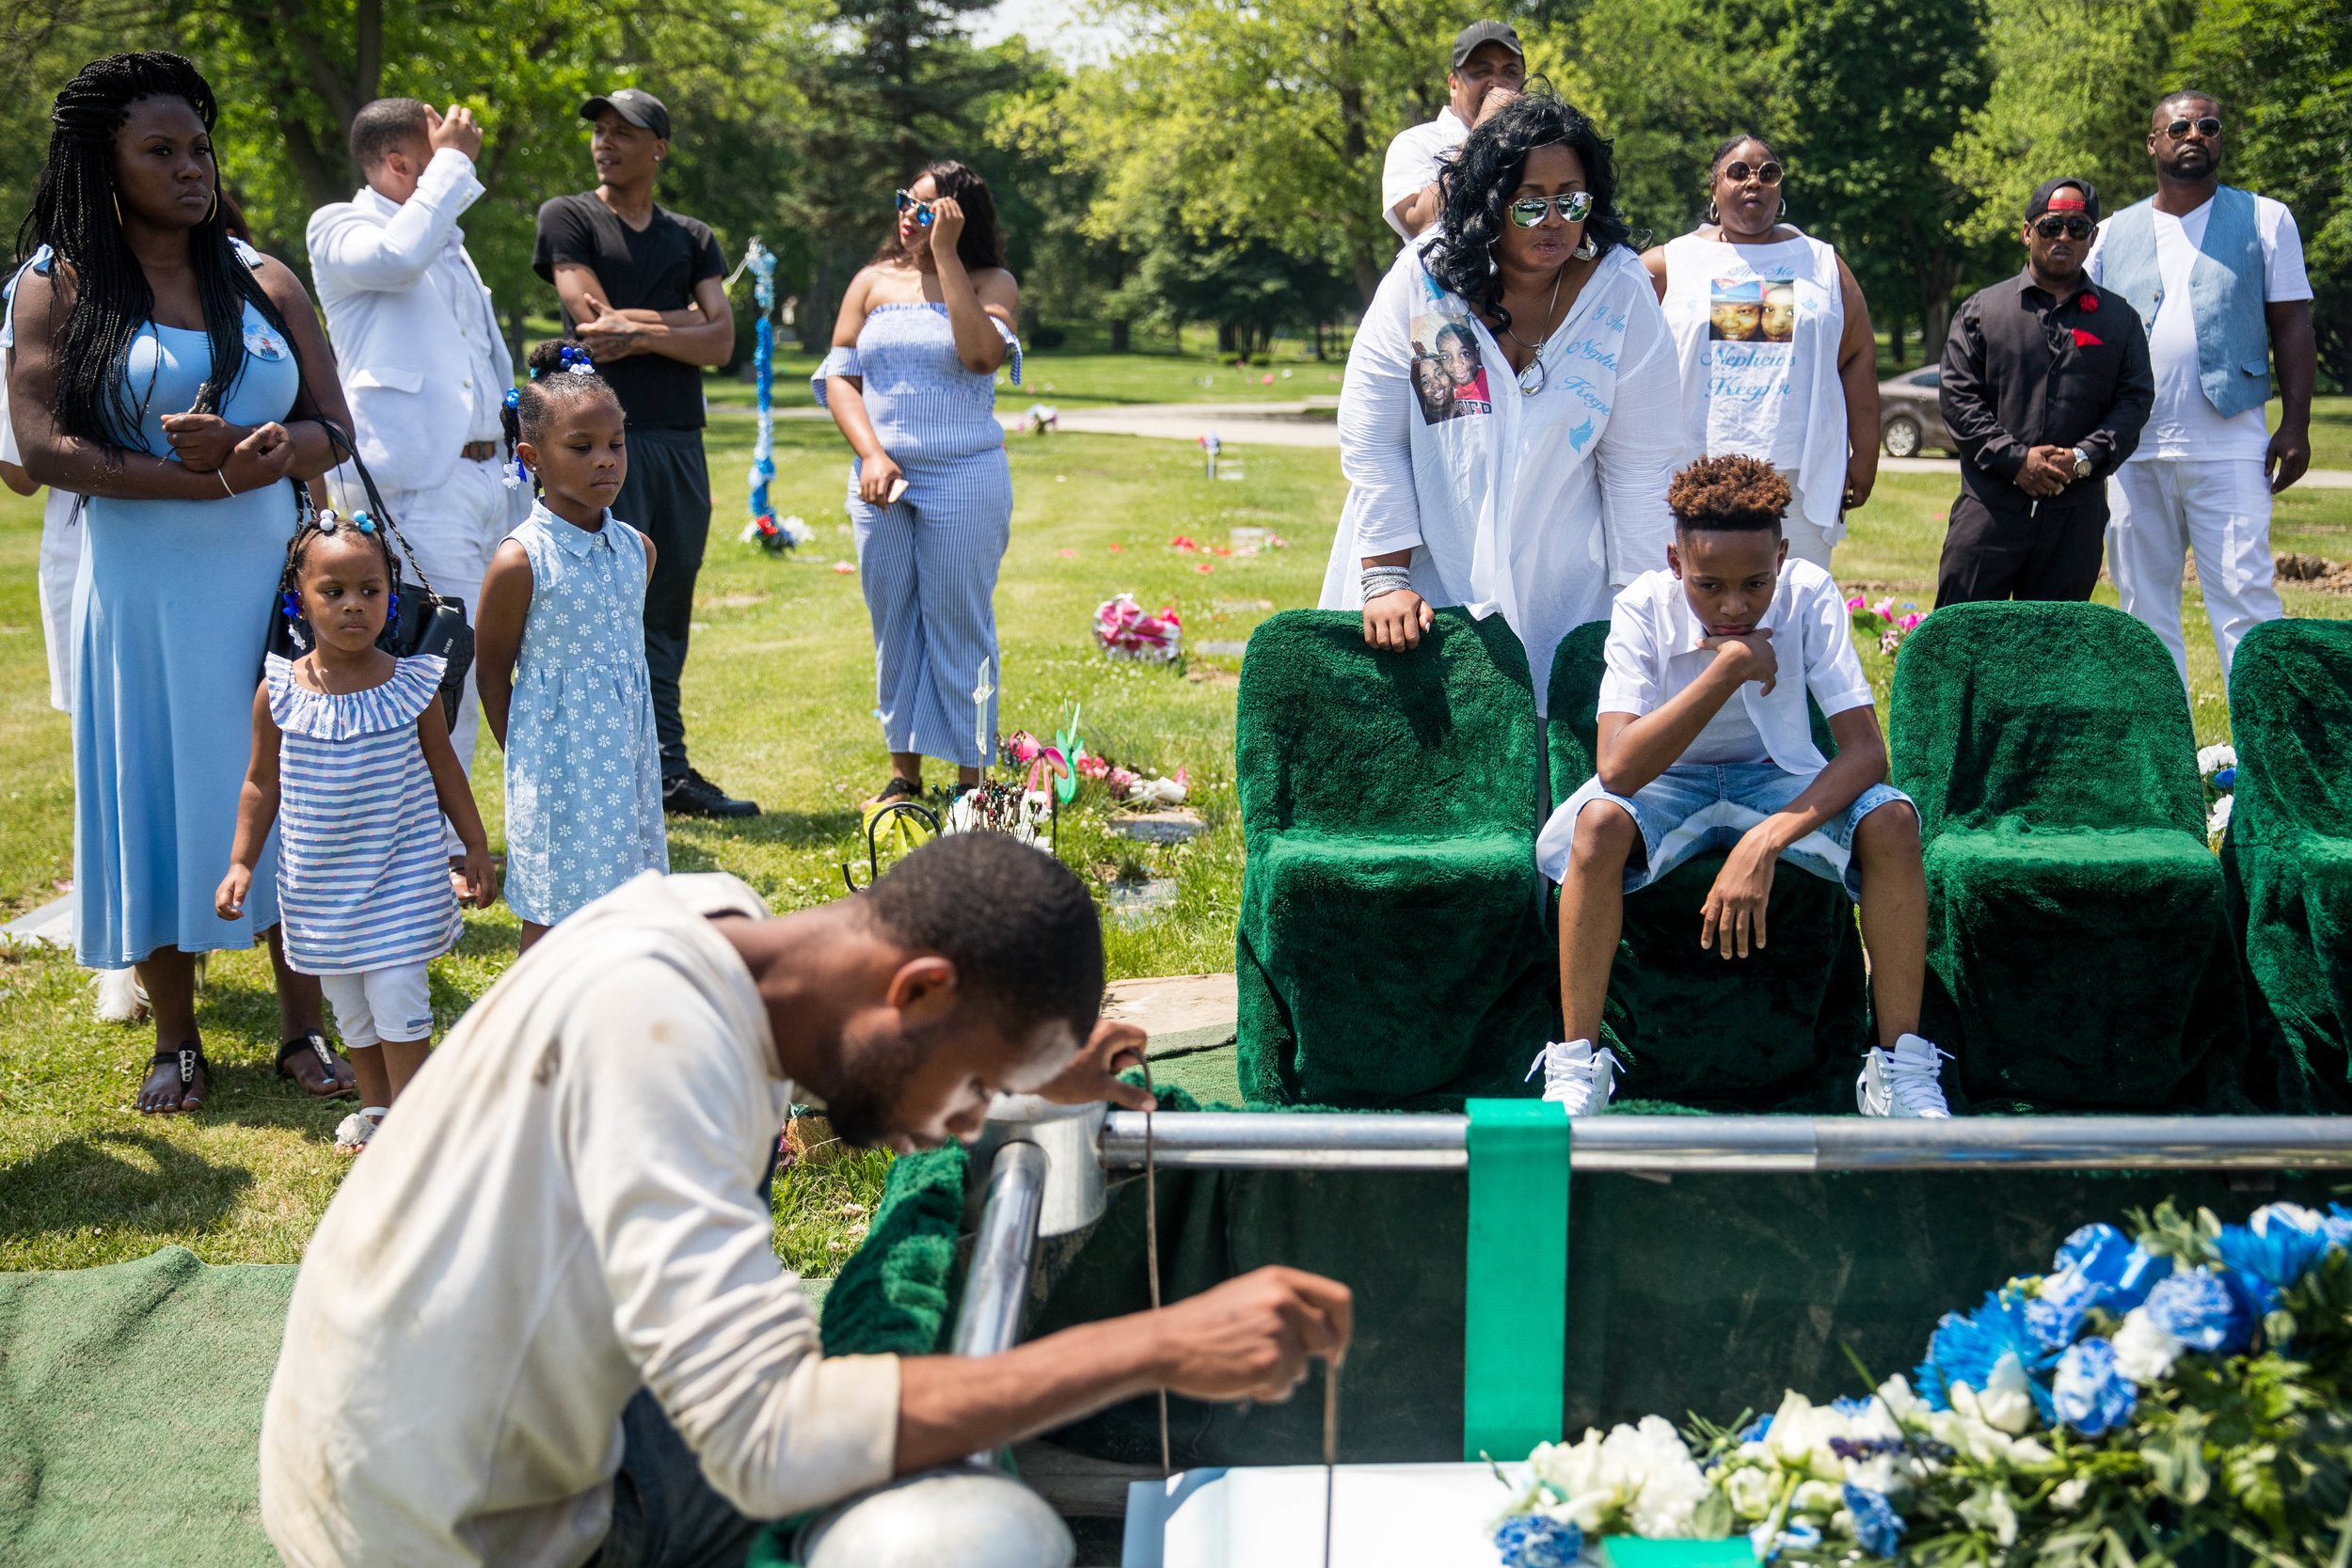  Family members watch as Jechon Anderson’s casket is lowered, during the funeral for the 11-year-old, at Mount Hope Cemetery, on Saturday, June 16, 2018, in the South Side of Chicago. He would rap about “putting guns down” with his stepfather before 